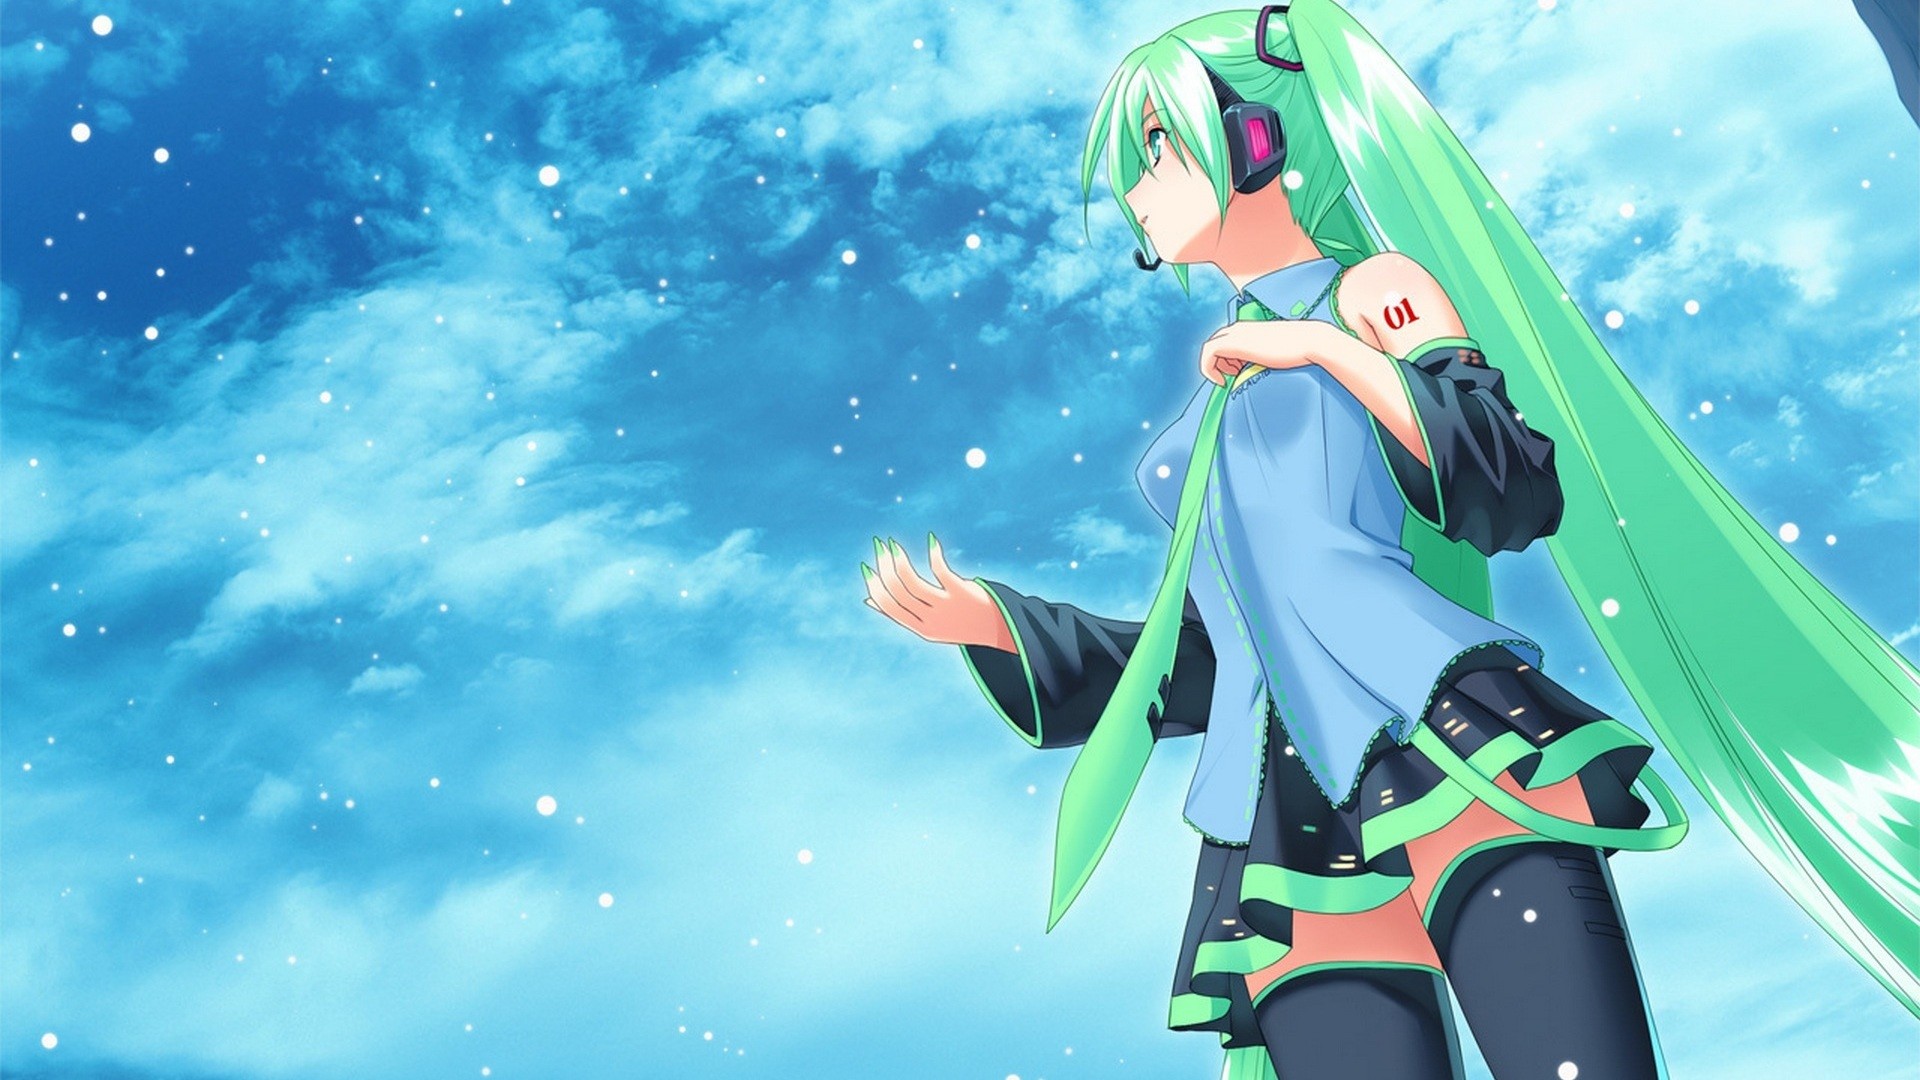 Explore Desktop Wallpapers, Anime Love, and more!